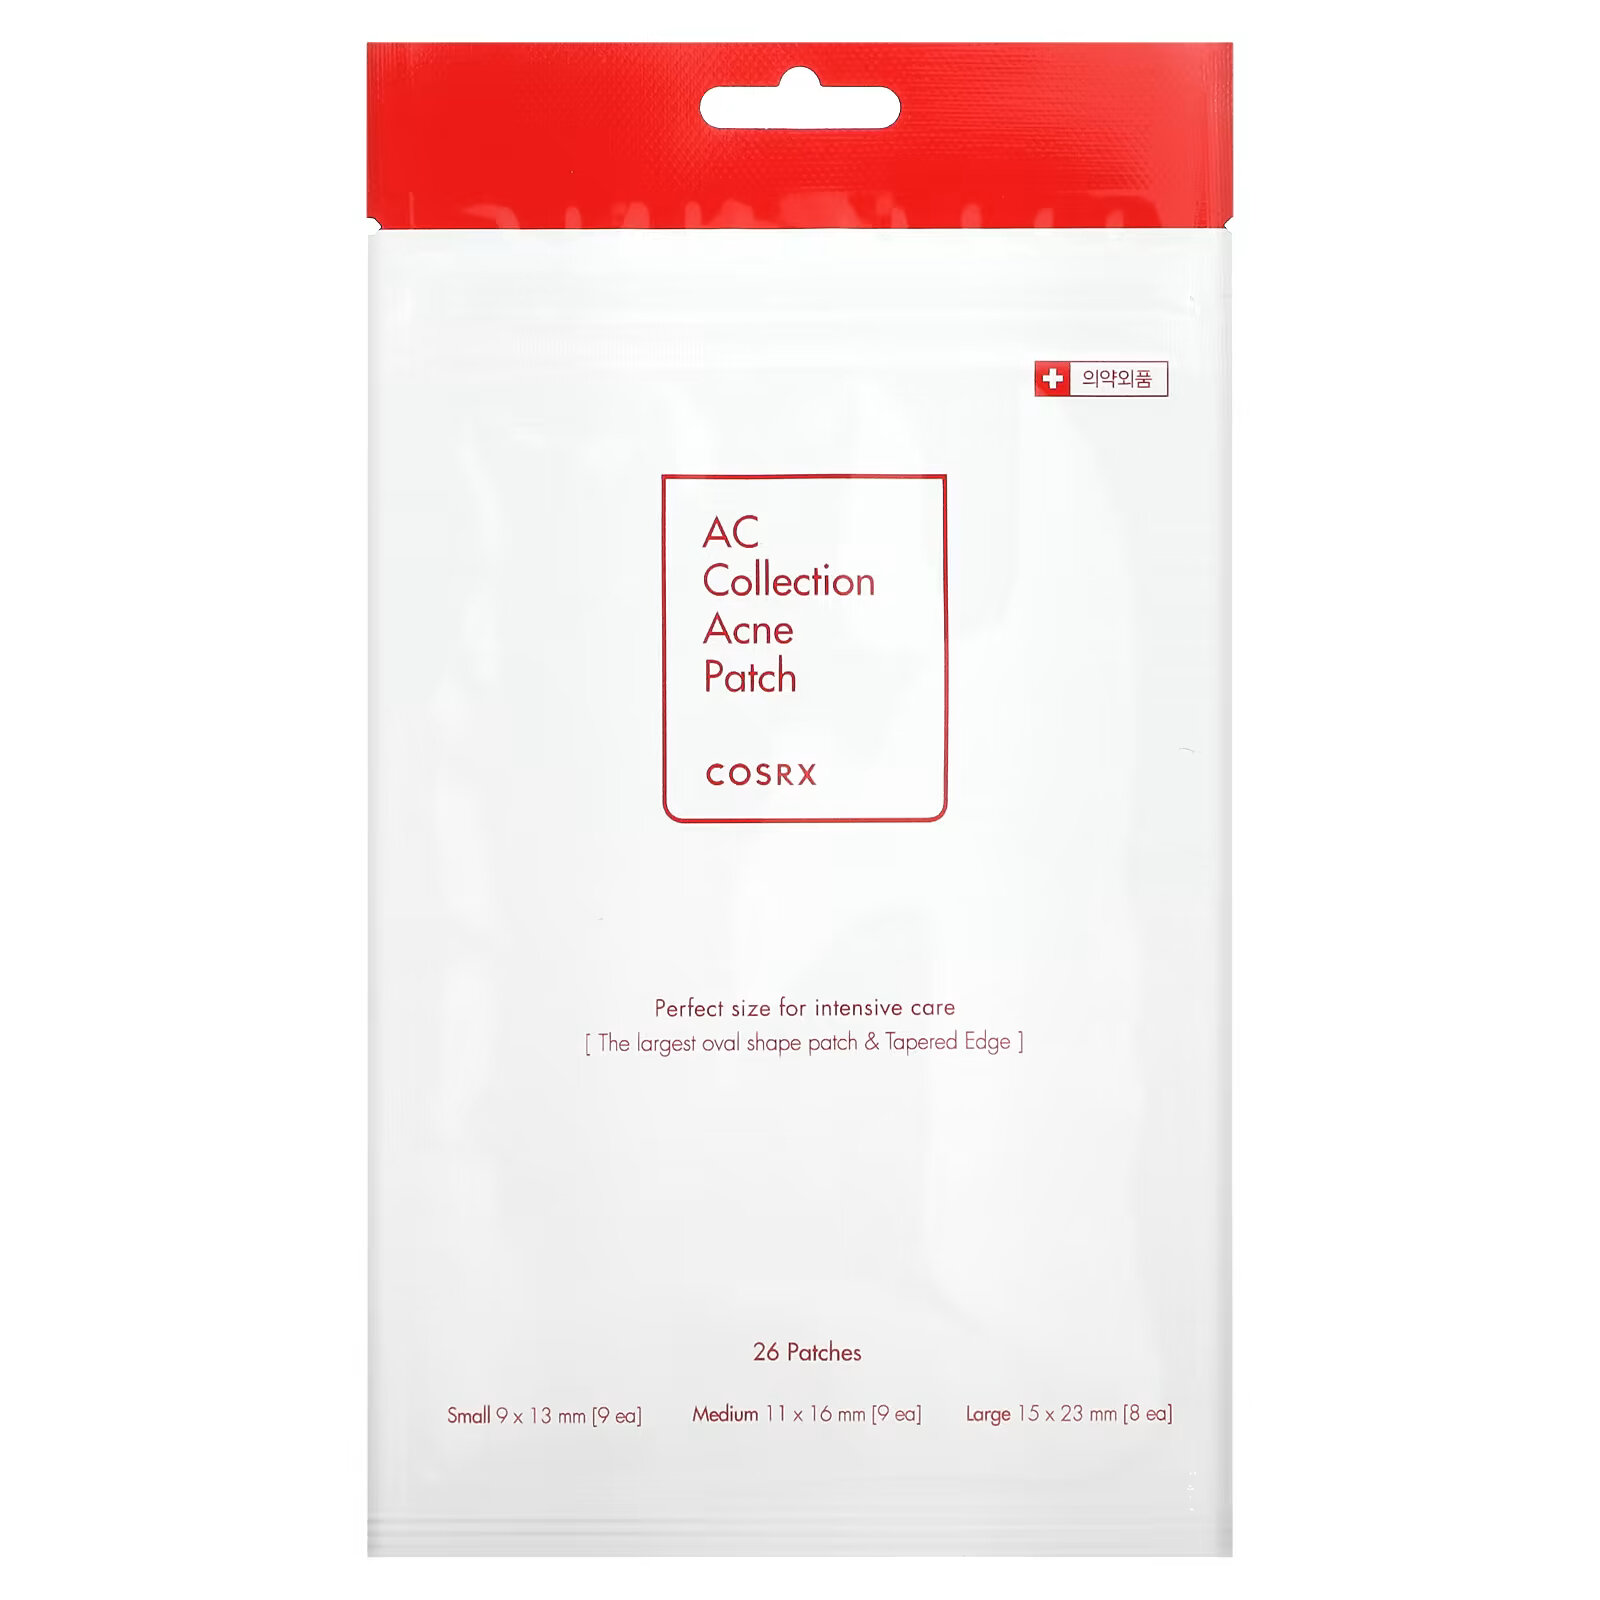 Cosrx, AC Collection, патч от акне, 26 шт. патчи от акне cosrx ac collection acne patch 26 шт